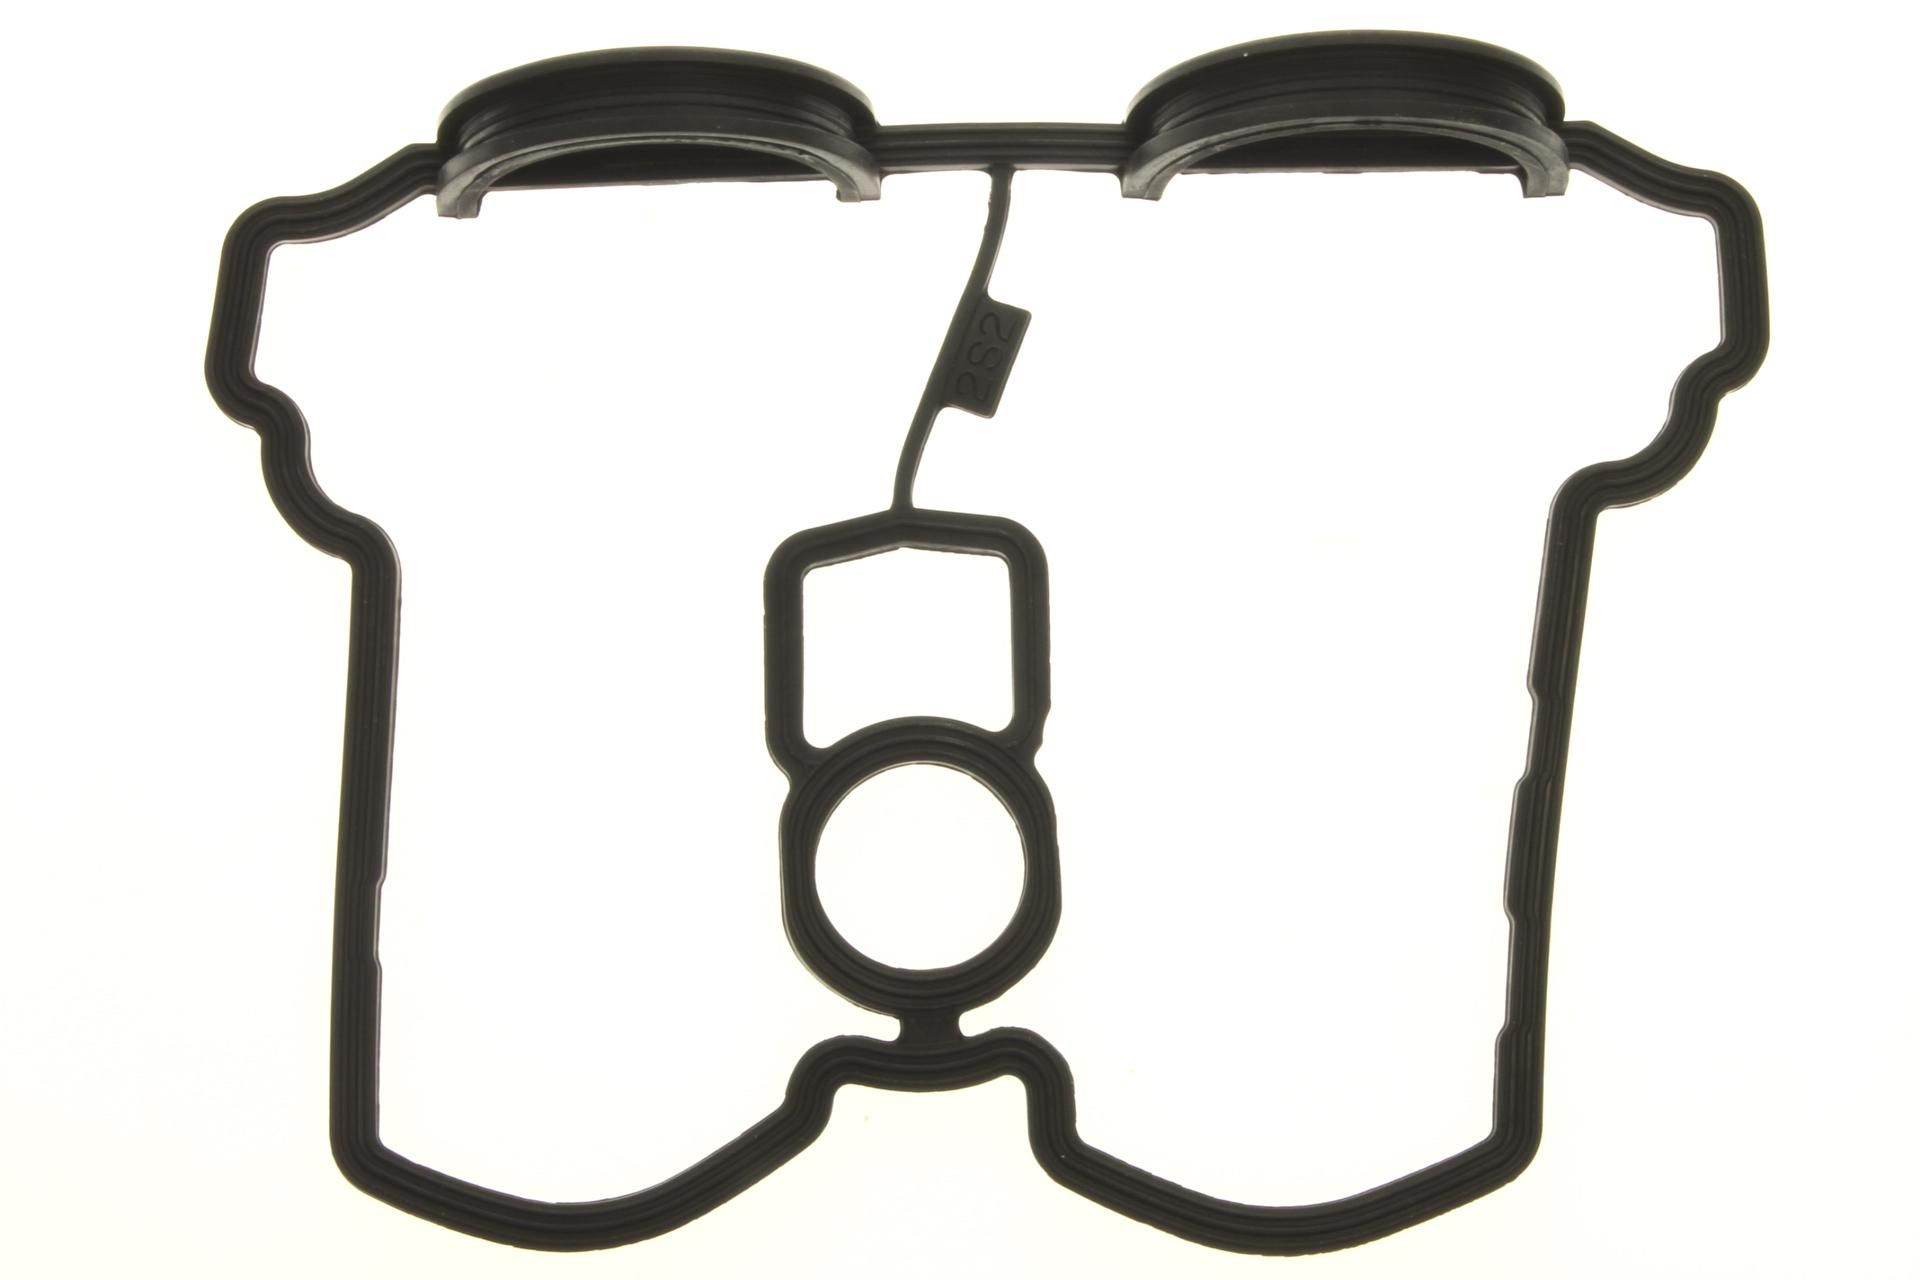 2S2-11193-00-00 HEAD COVER GASKET